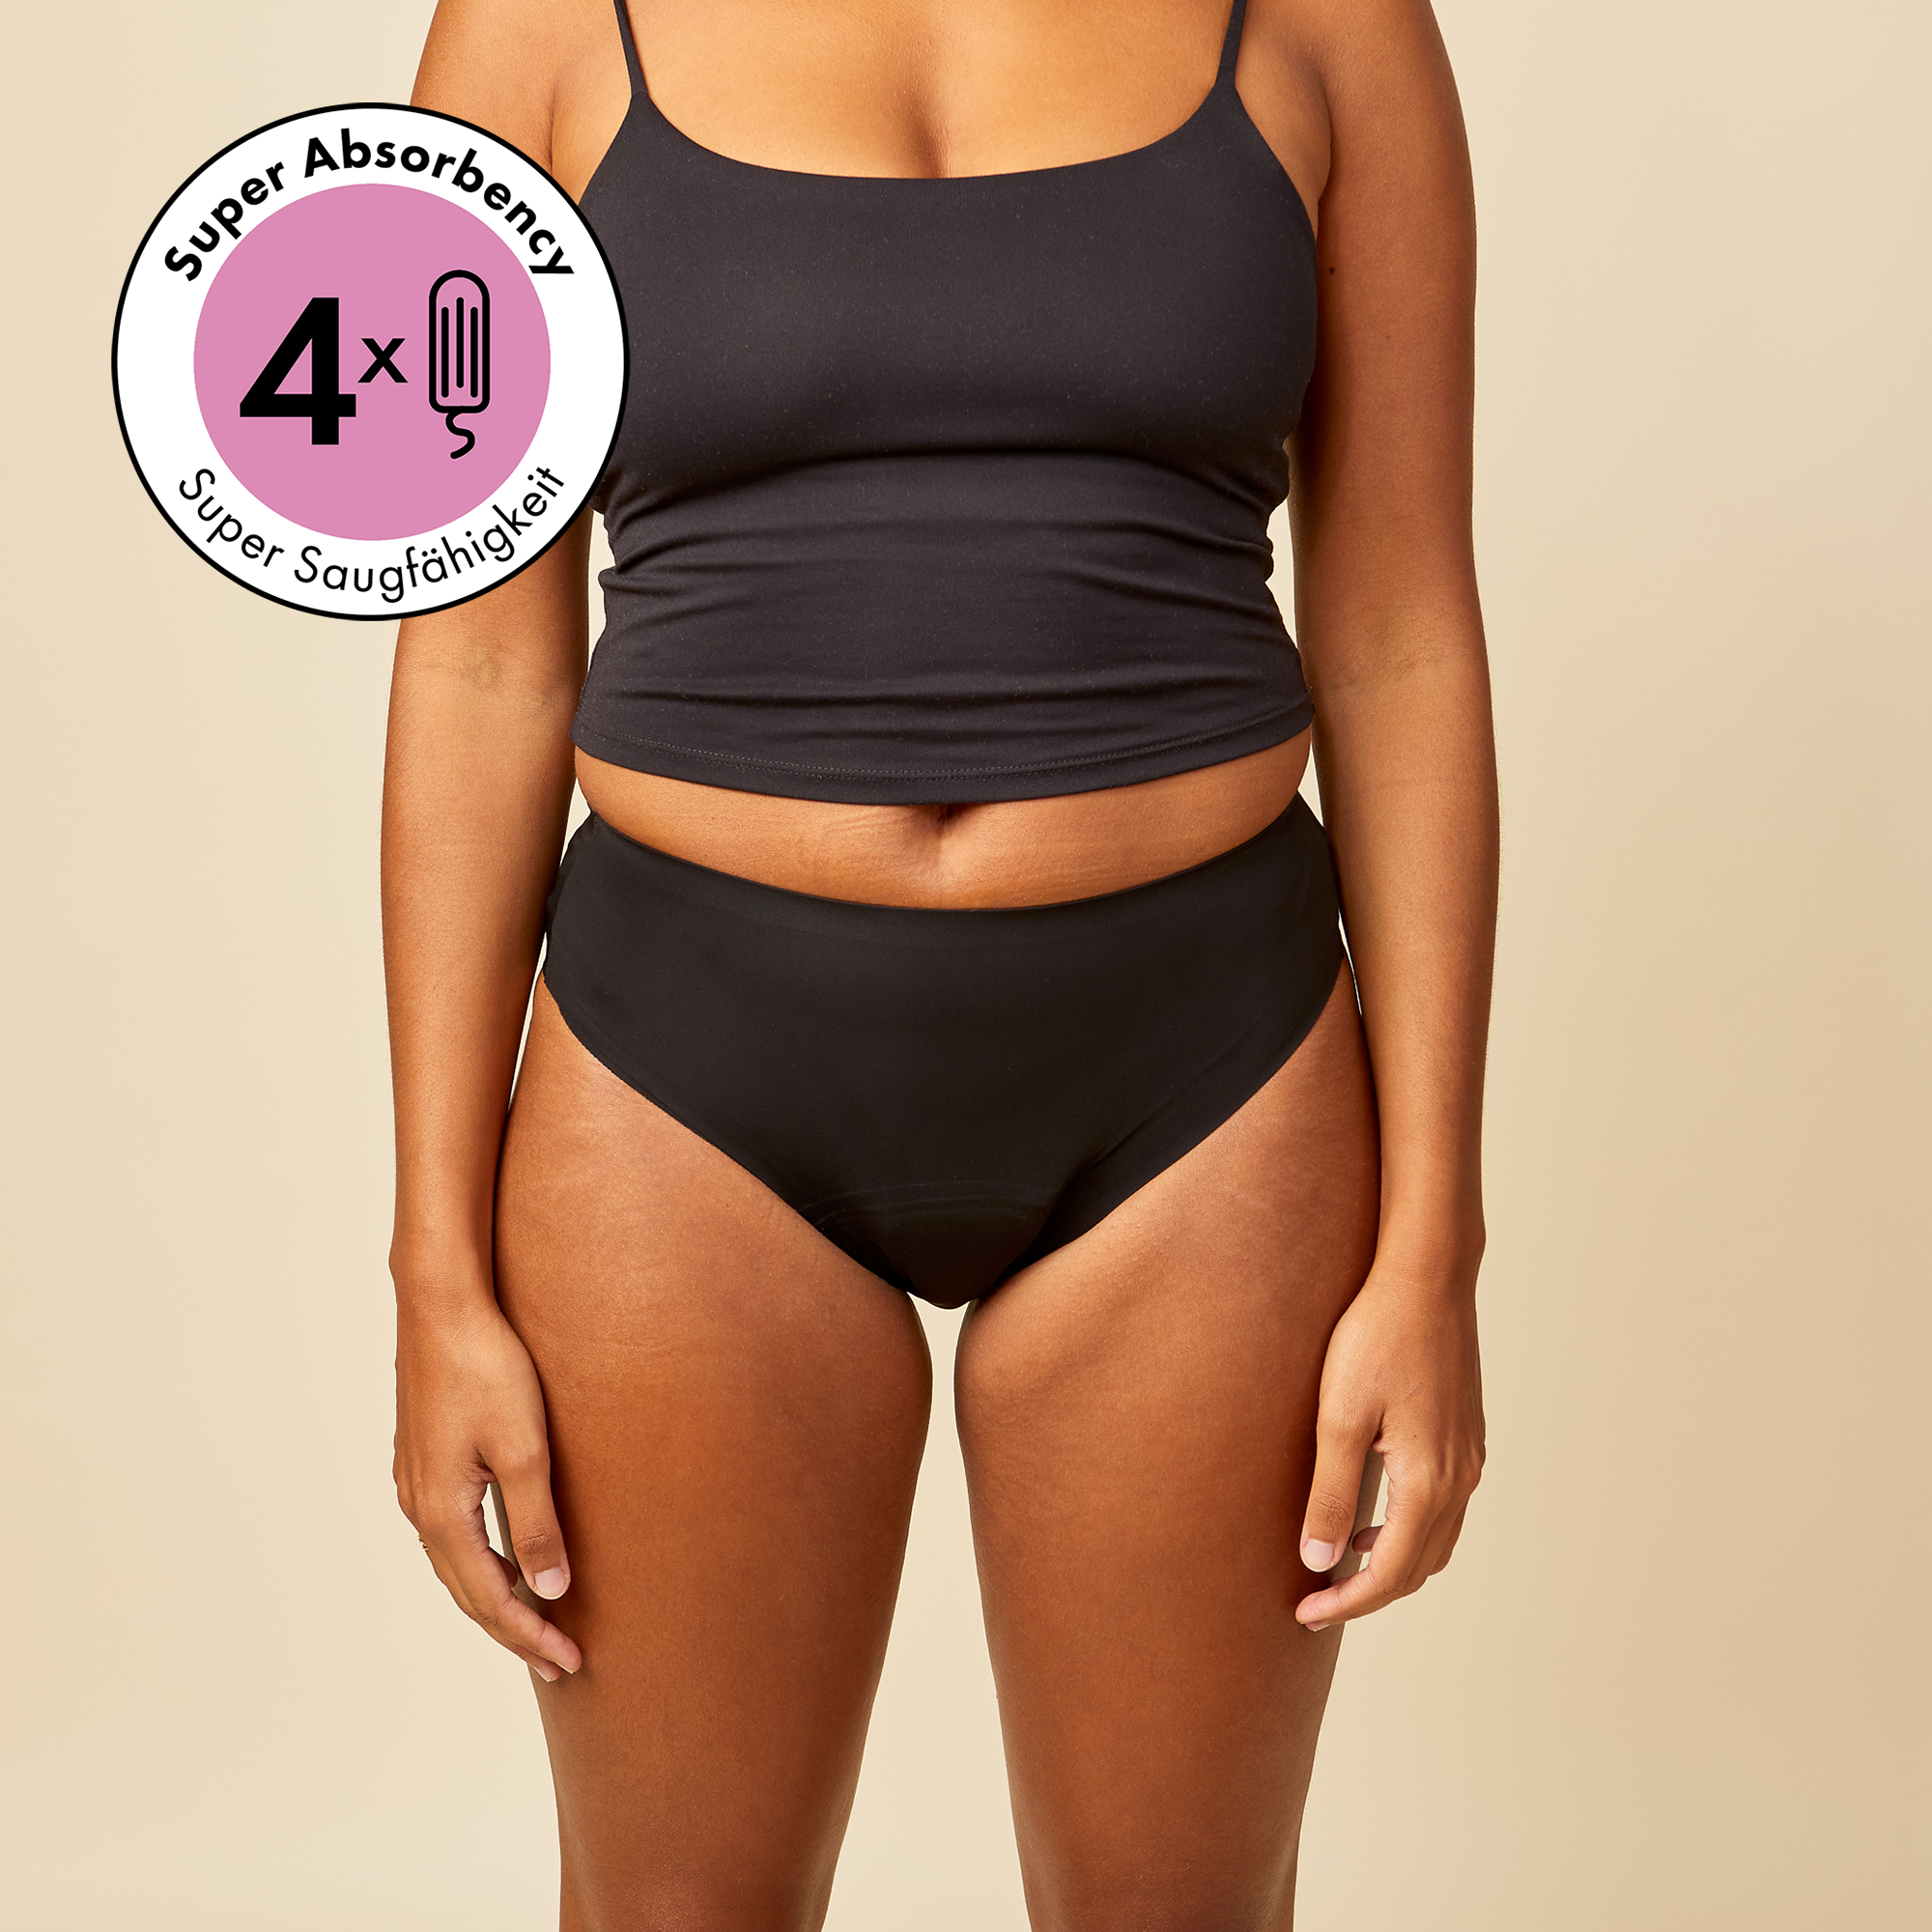 Cheeky Period Underwear made of nylon shown worn by a model from the front. Icon showing super absorbency of the underwear of 4 tampons worth of blood. 